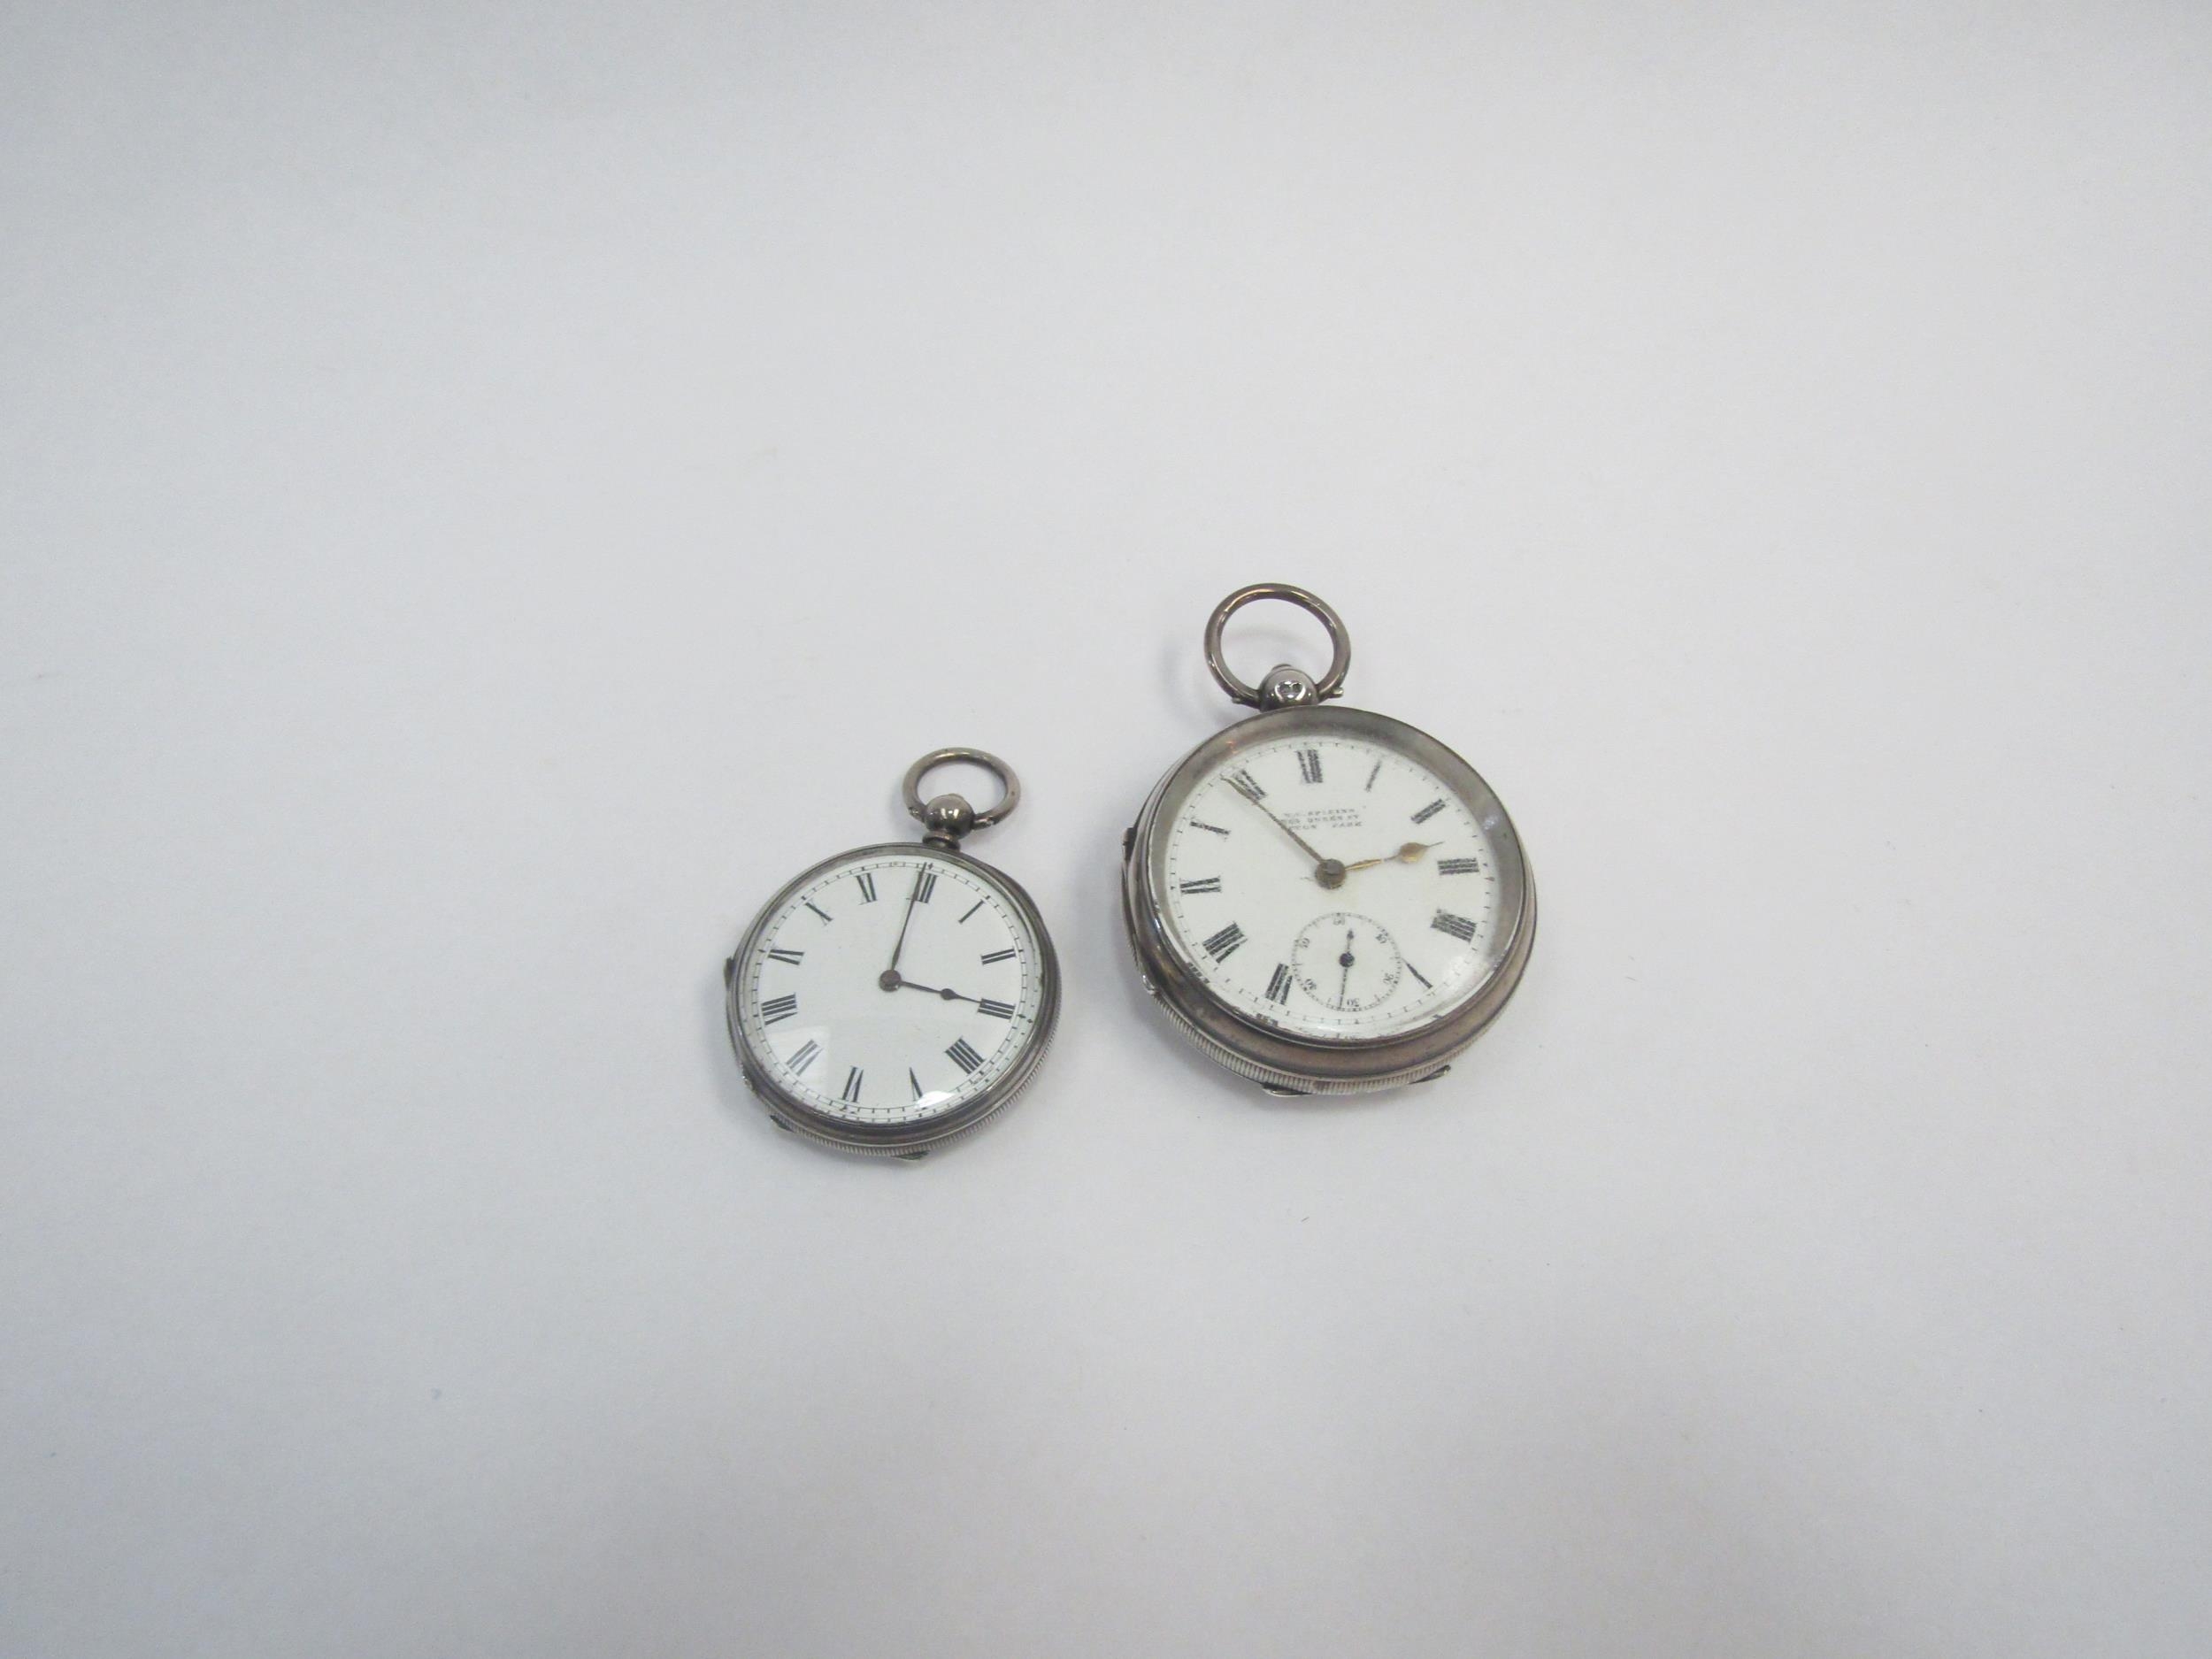 Two pocket watches; one silver example by W.C. Spikins, Upton Park, the other marked 'fine